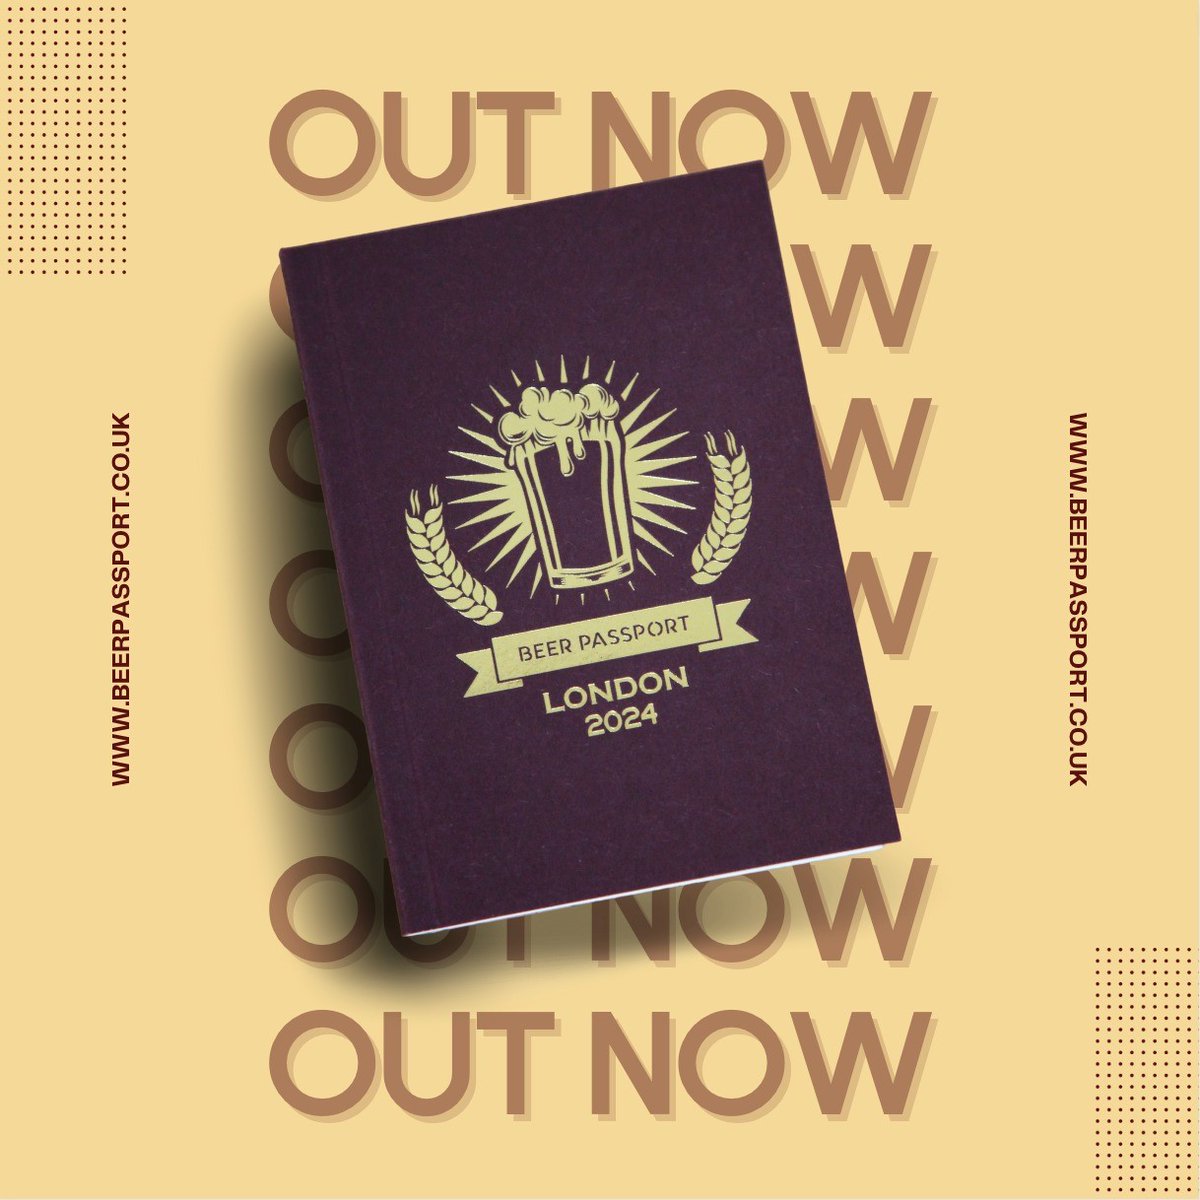 BEER PASSPORT 2024 - OUT NOW! Featuring 70 amazing taprooms across London, including @SignatureBrew, @BeavertownBeer, @GipsyHillBrew, @BrixtonBrewery, @Fullers, @SambrooksBrew, @WerewolfBeer, @FivePointsBrew, @fourpurebrewing, @MeantimeBrewing and many many more!